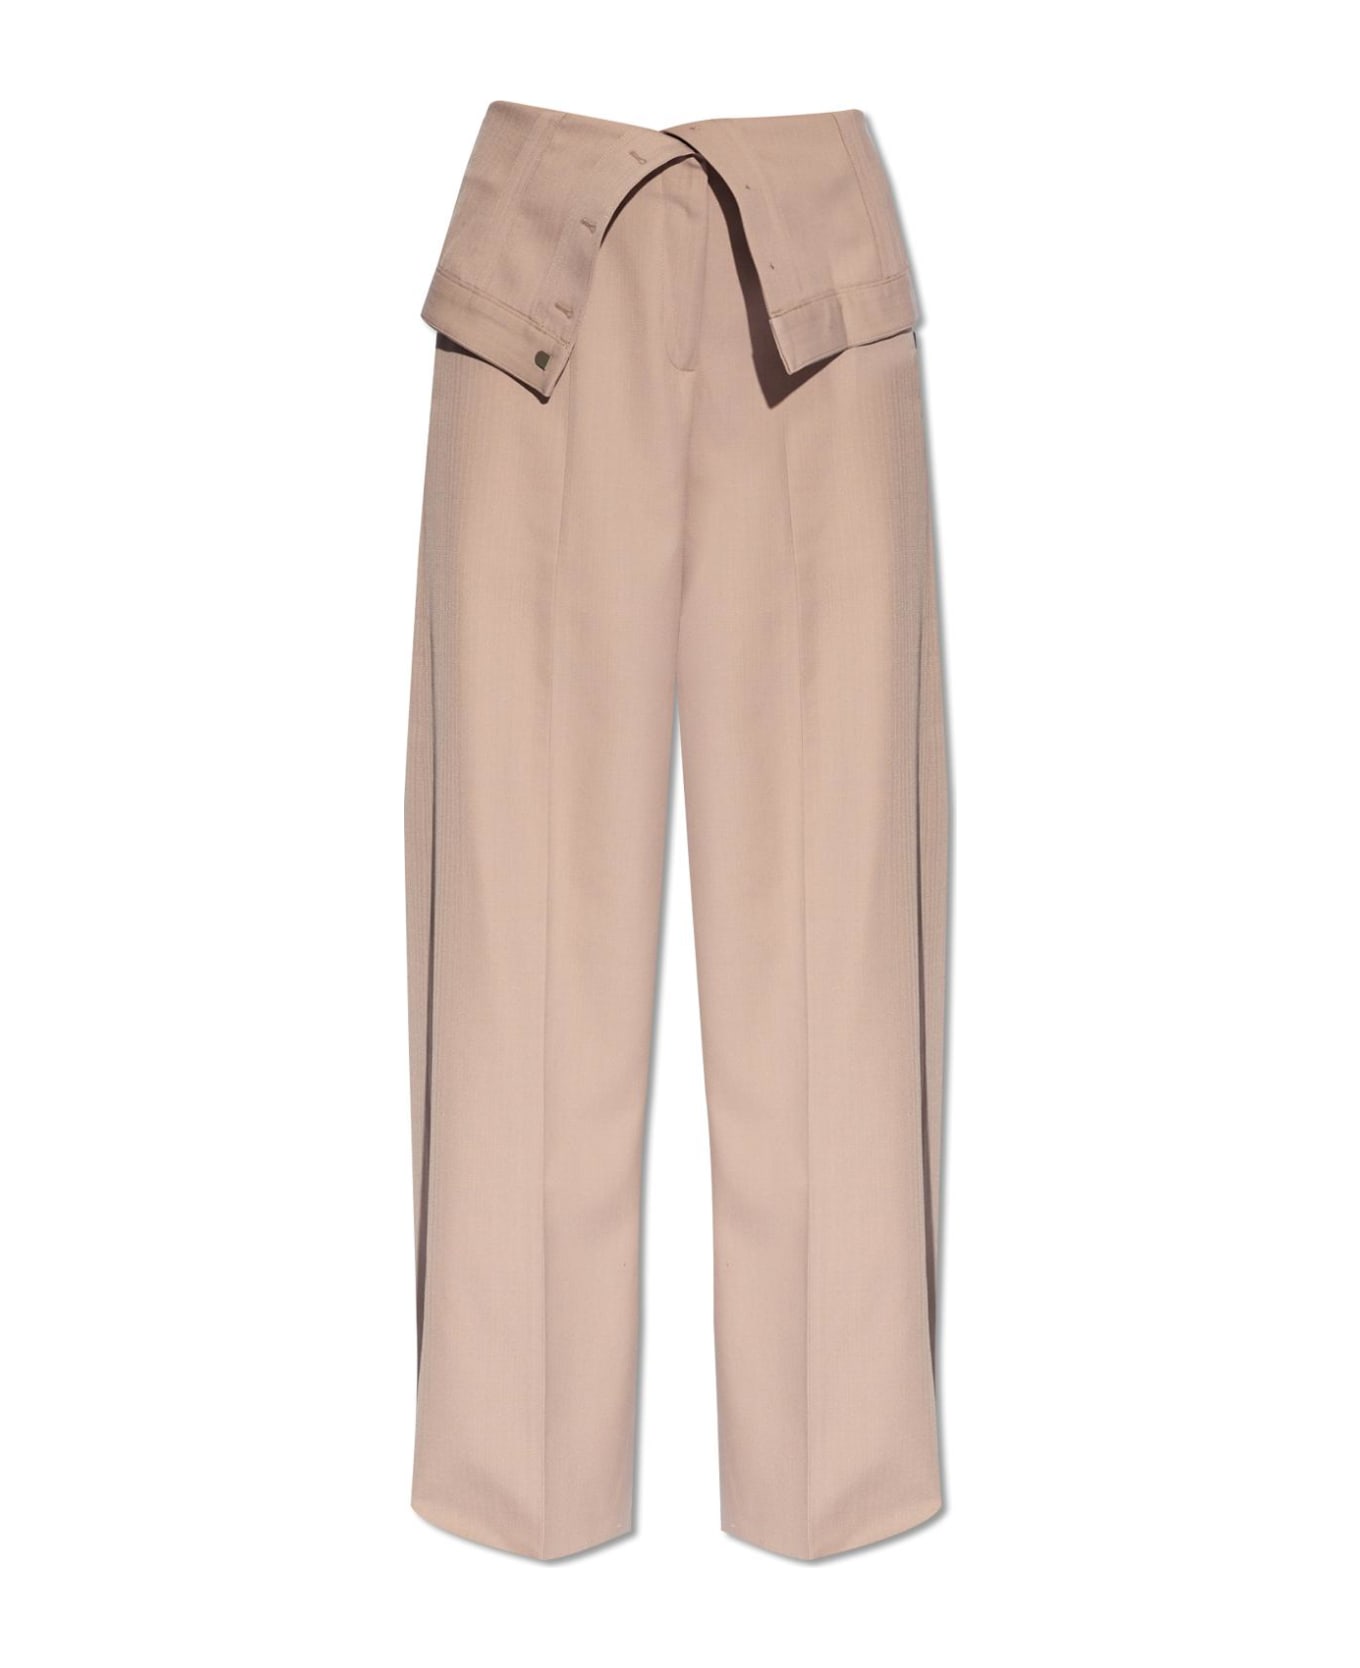 Acne Studios Tailored Trousers In Wool Blend - COLD BEIGE ボトムス